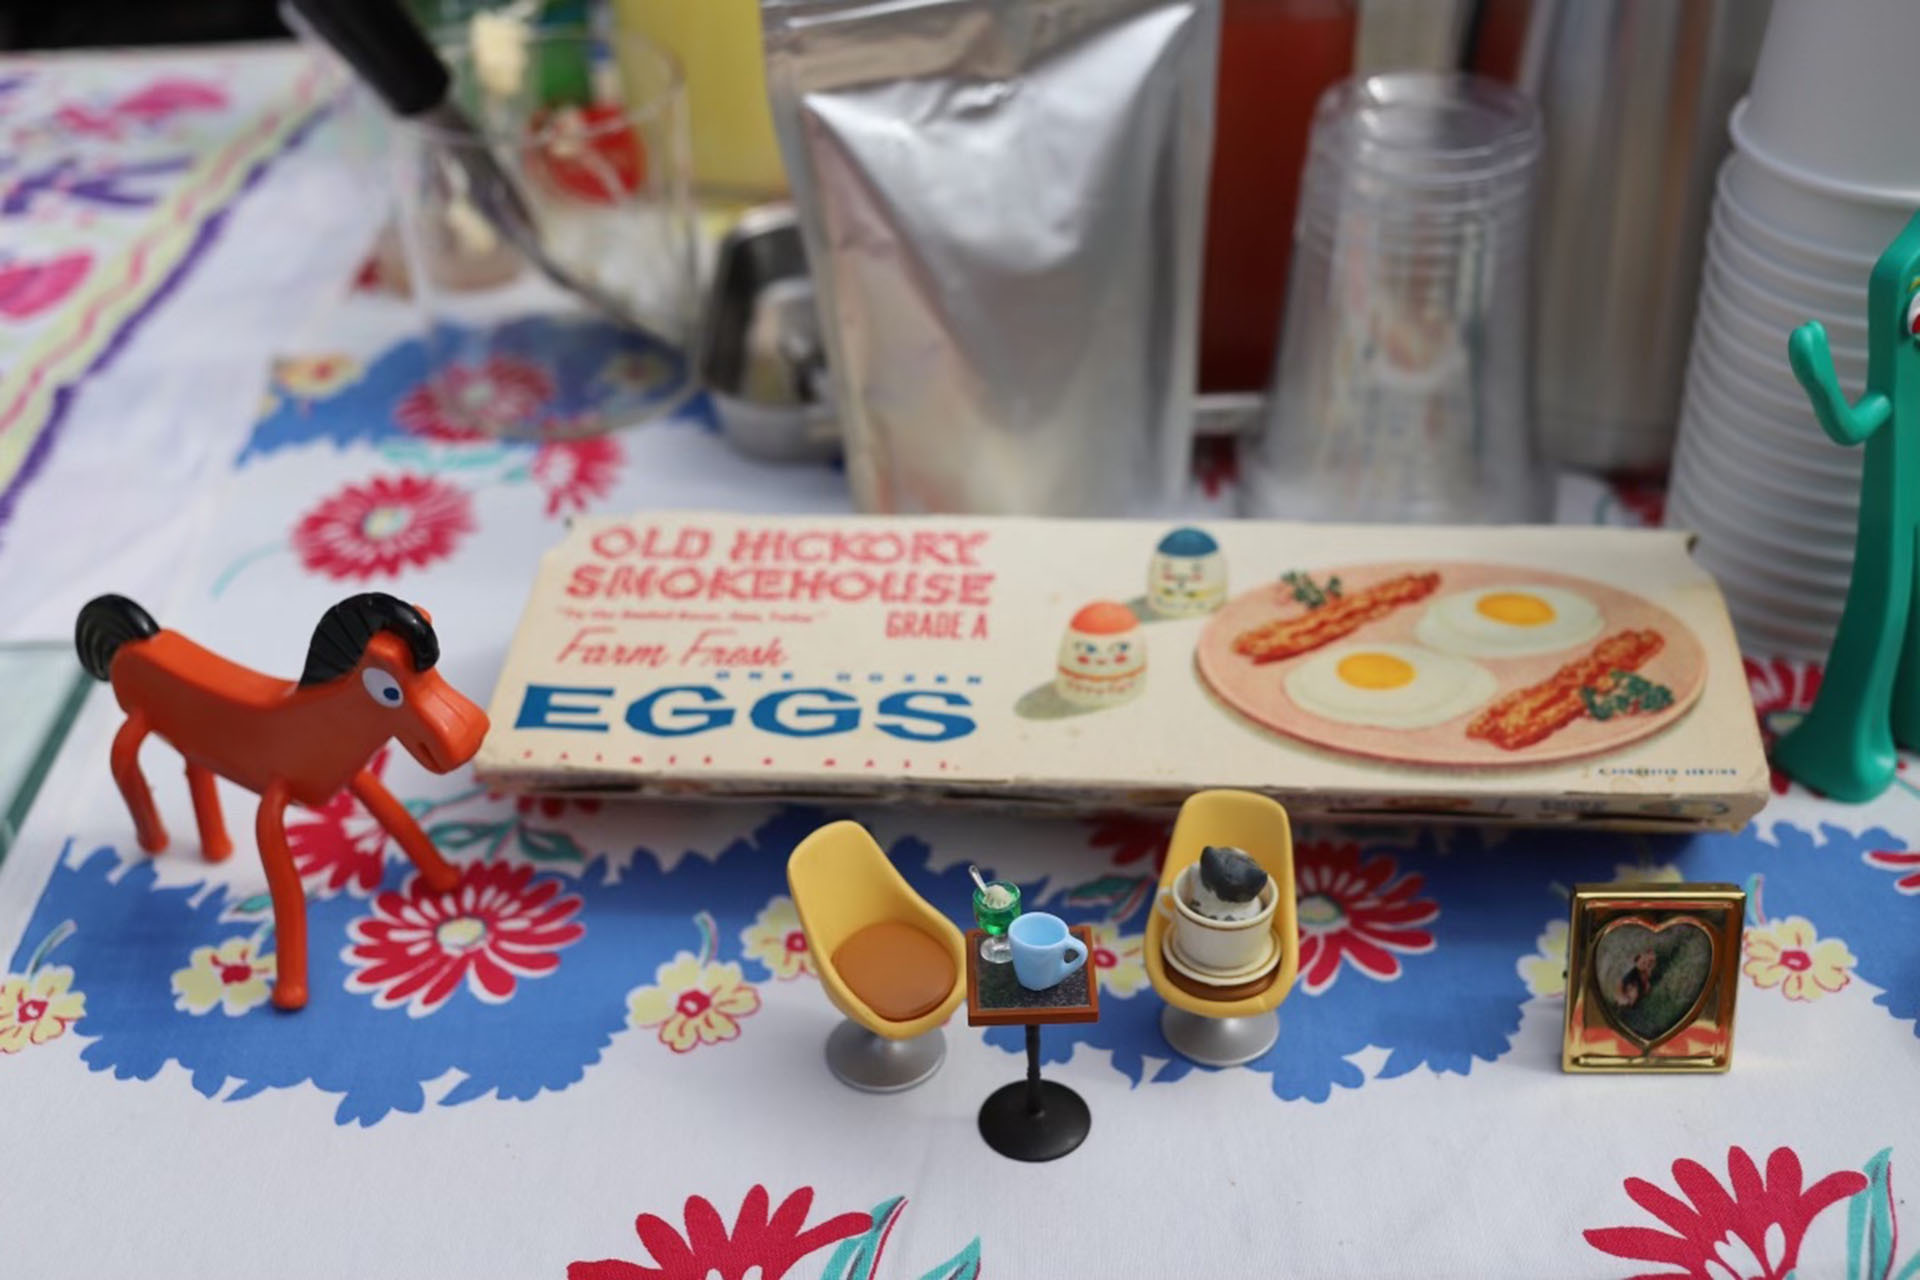 a collection of antique knick-knacks are playfully laid out on a table next to a hand painted sign that reads “eggs”